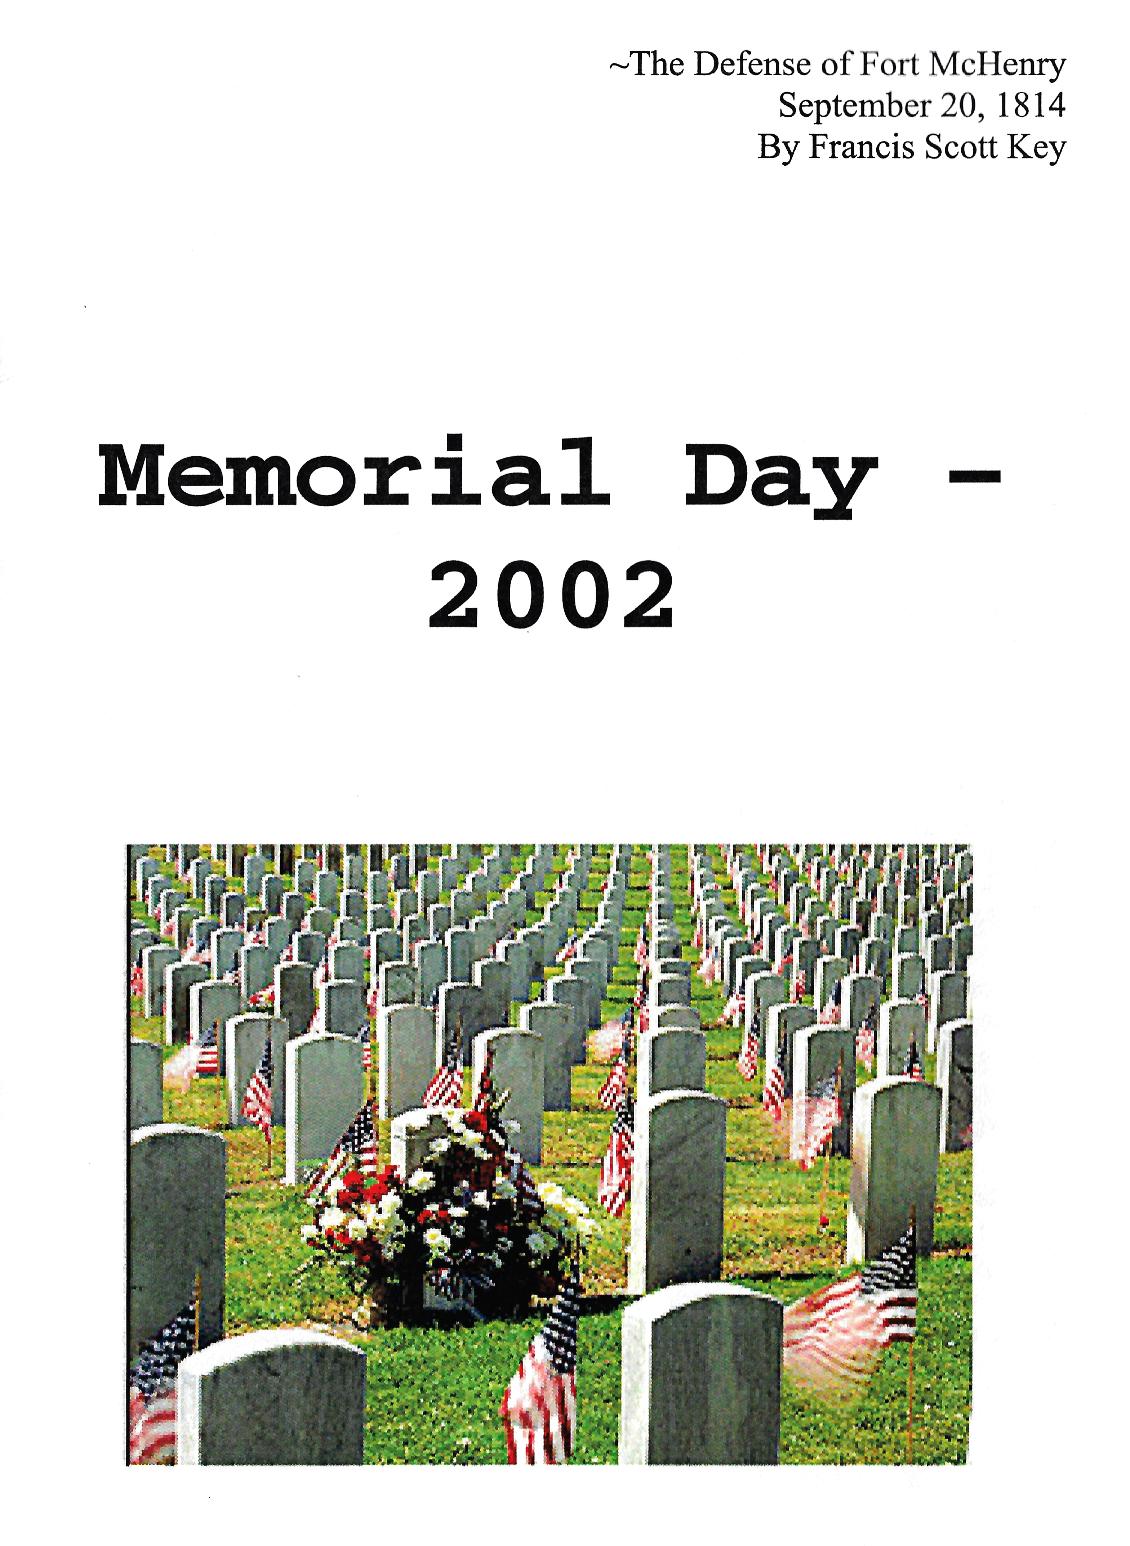 Memorial Day Program at the NH State Veterans Cemetery May 30th 2002